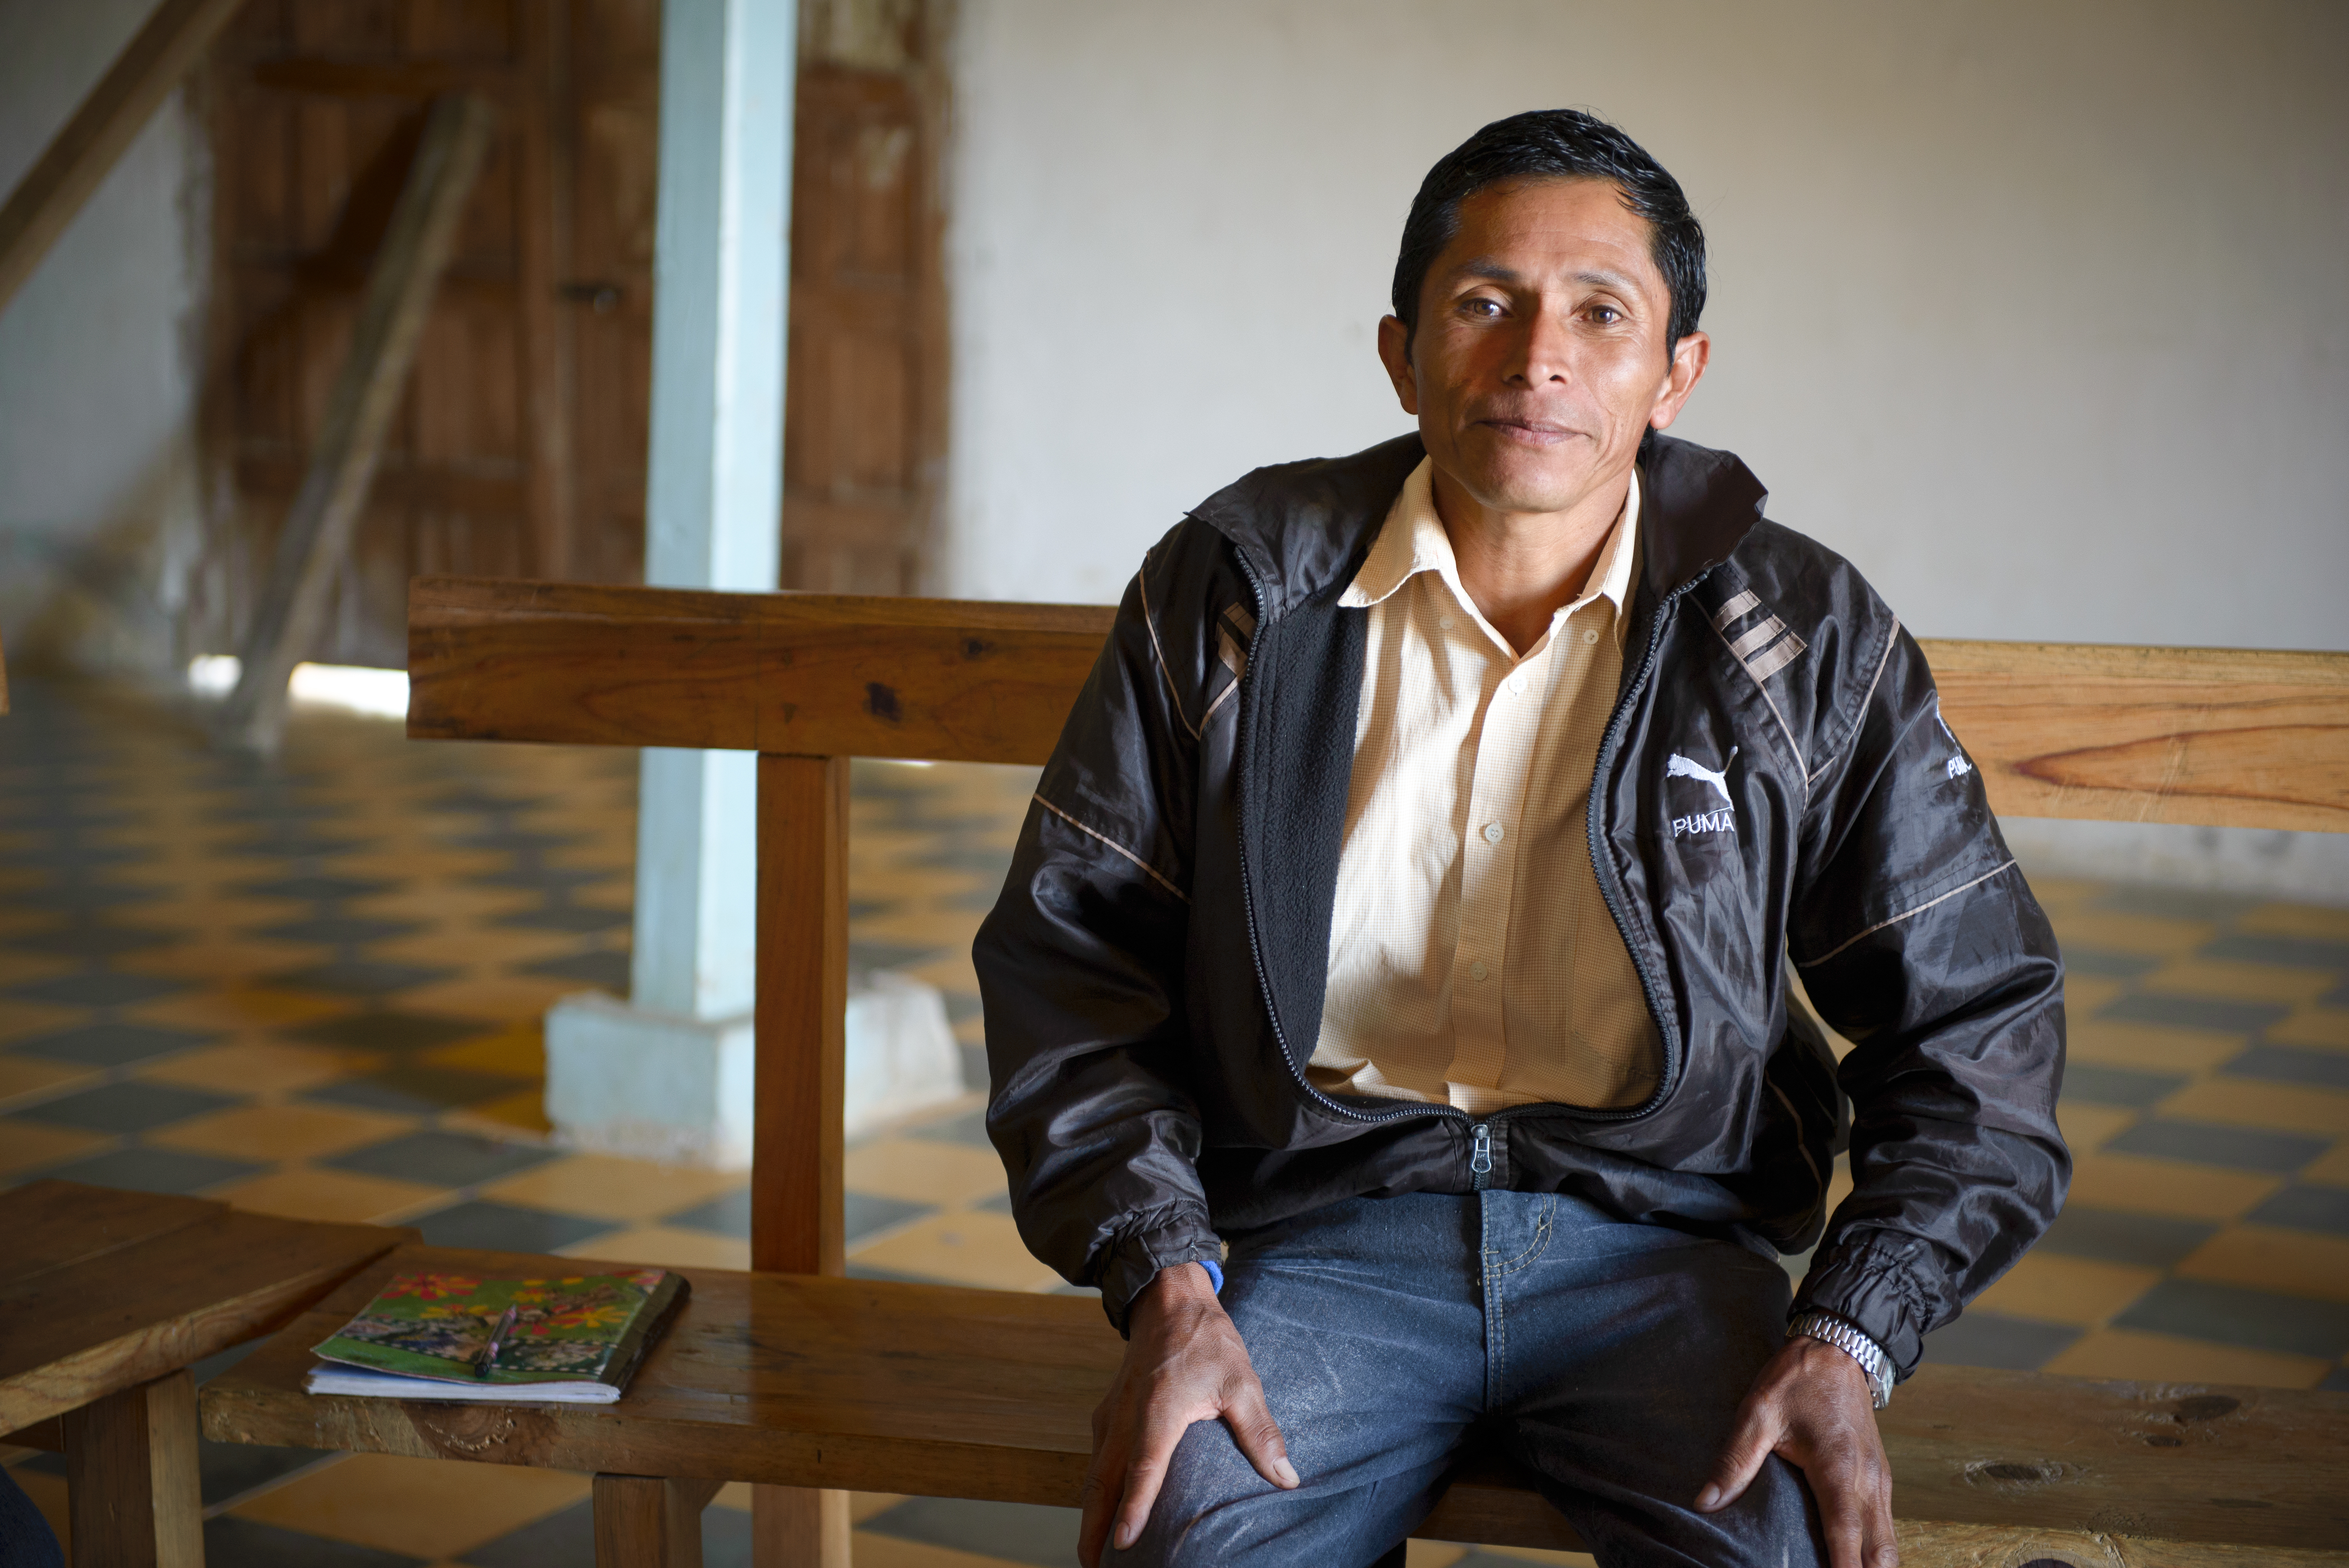 Francisco Rodriguez Perez, 42, participates in World Vision's Channels of Hope training.